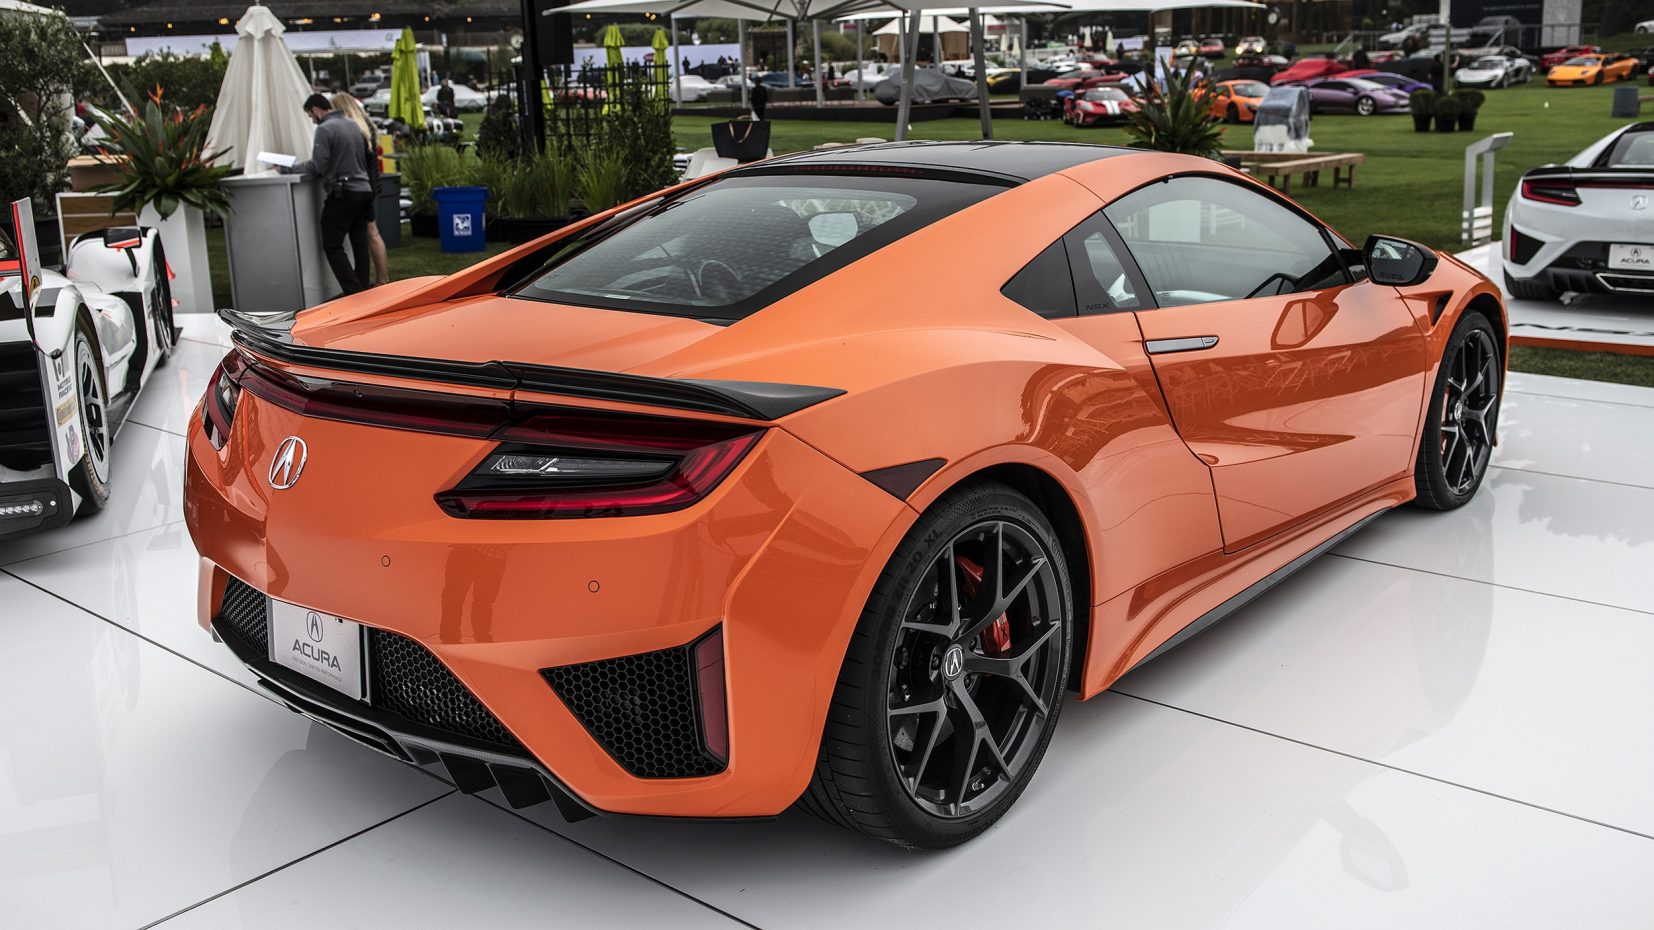 Best 2019 Acura Nsx Rear High Resolution Wallpapers - Acura 2019 Sports Car - HD Wallpaper 